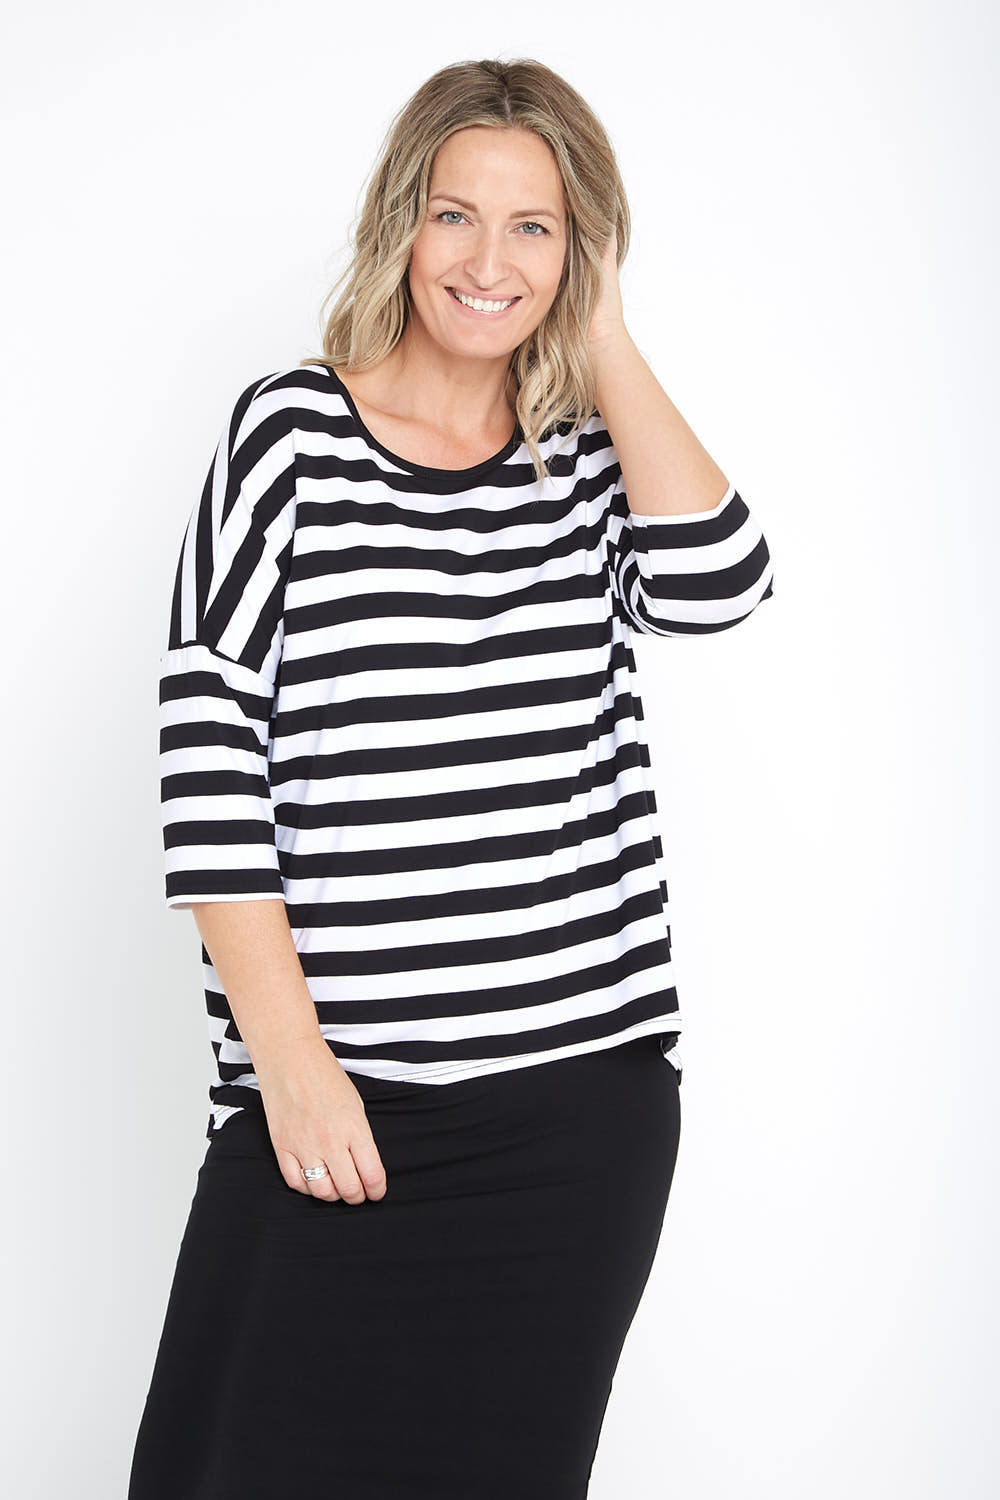 Montmartre Bamboo Top - Wide Black/White